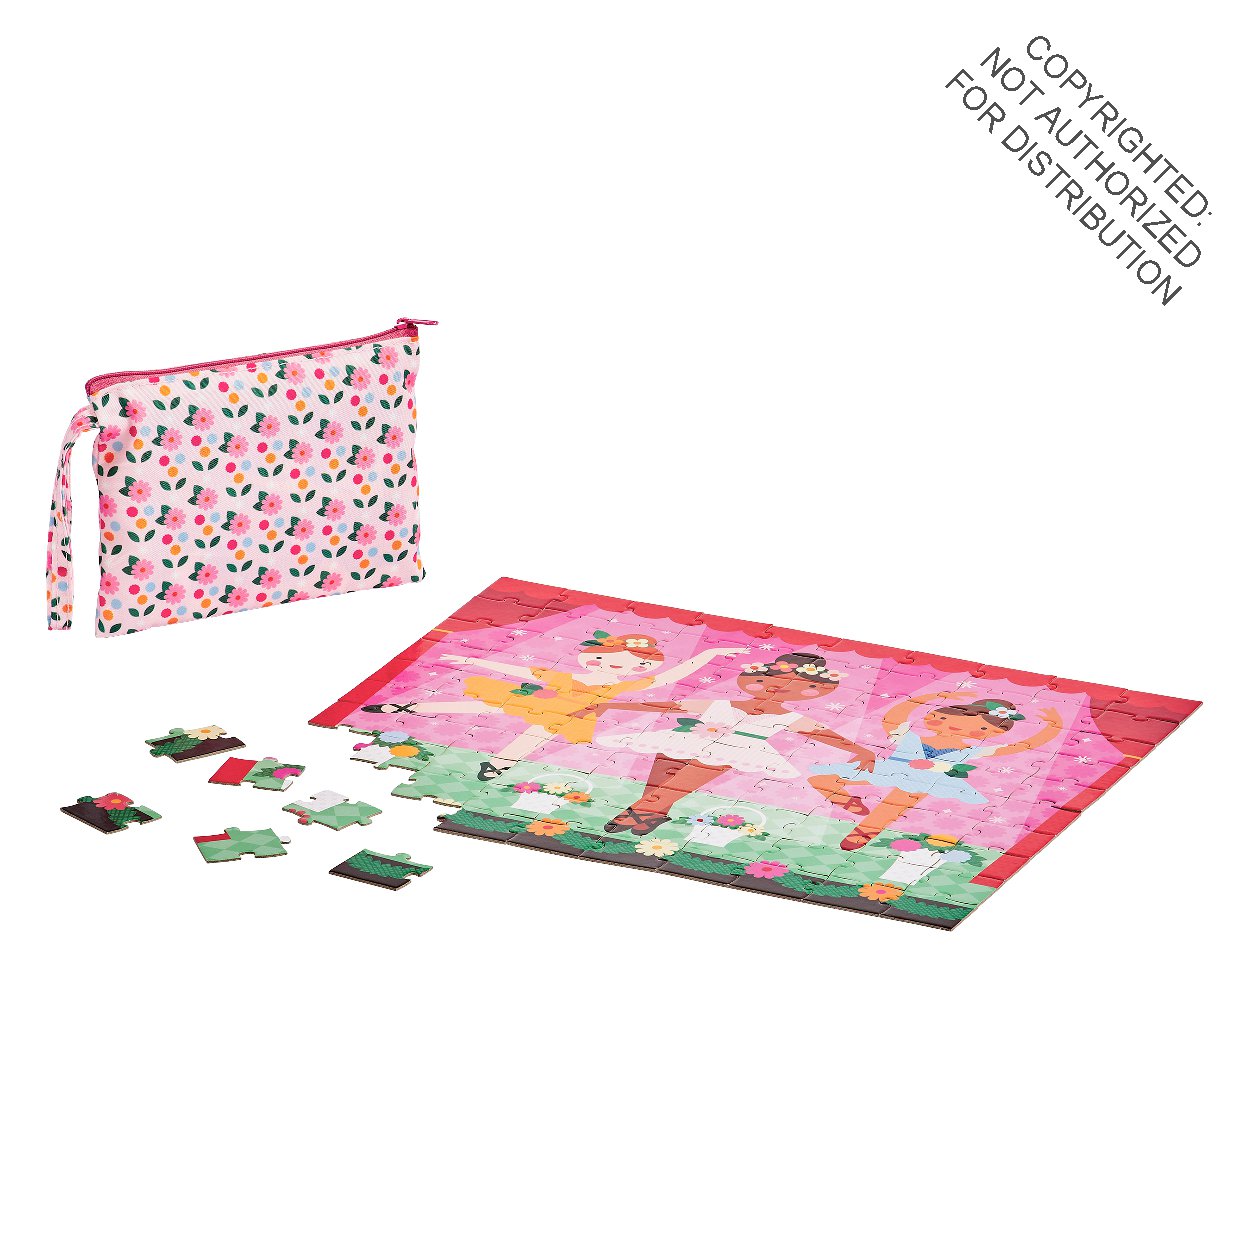 Ballerina Two-sided On-the-Go Puzzle